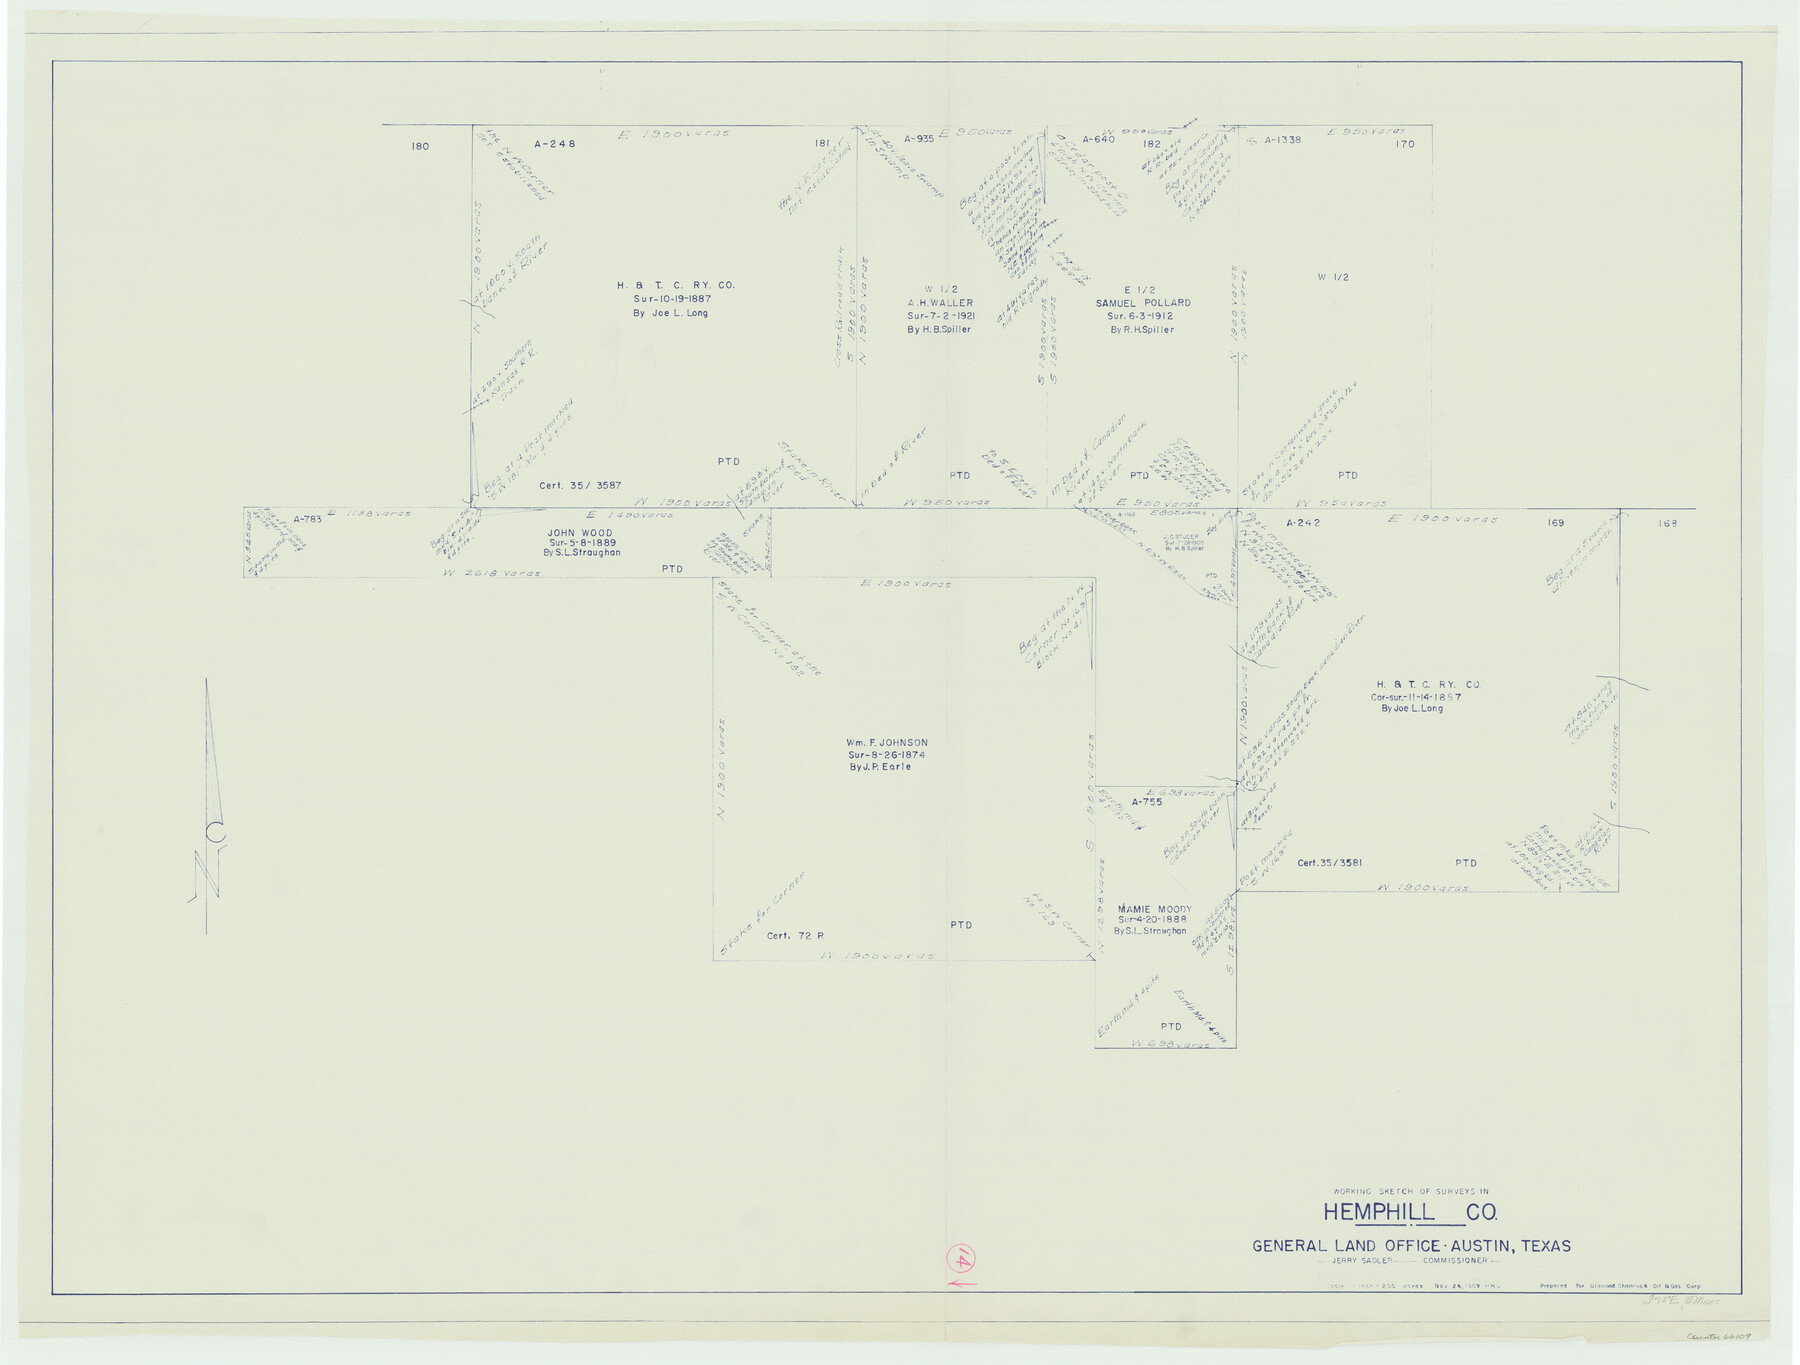 66109, Hemphill County Working Sketch 14, General Map Collection